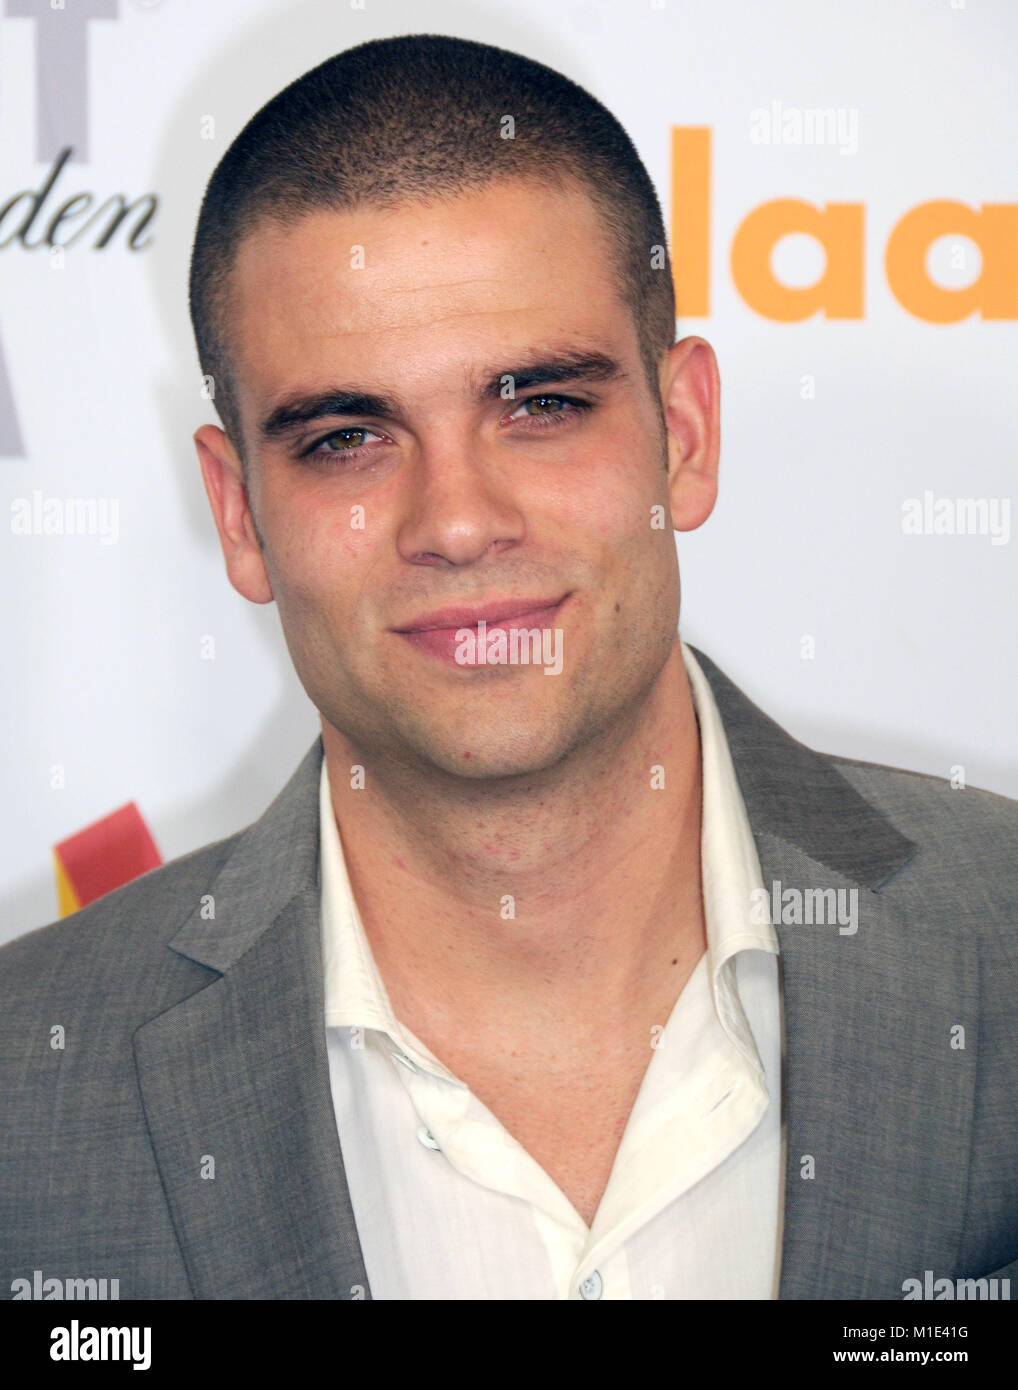 CENTURY CITY, CA - APRIL 17: Actor Mark Salling attends the 21st annual GLAAD Media Awards on the Hyatt Regency Century Plaza on April 17, 2010 in Century City, California. Photo by Barry King/Alamy Stock Photo Stock Photo